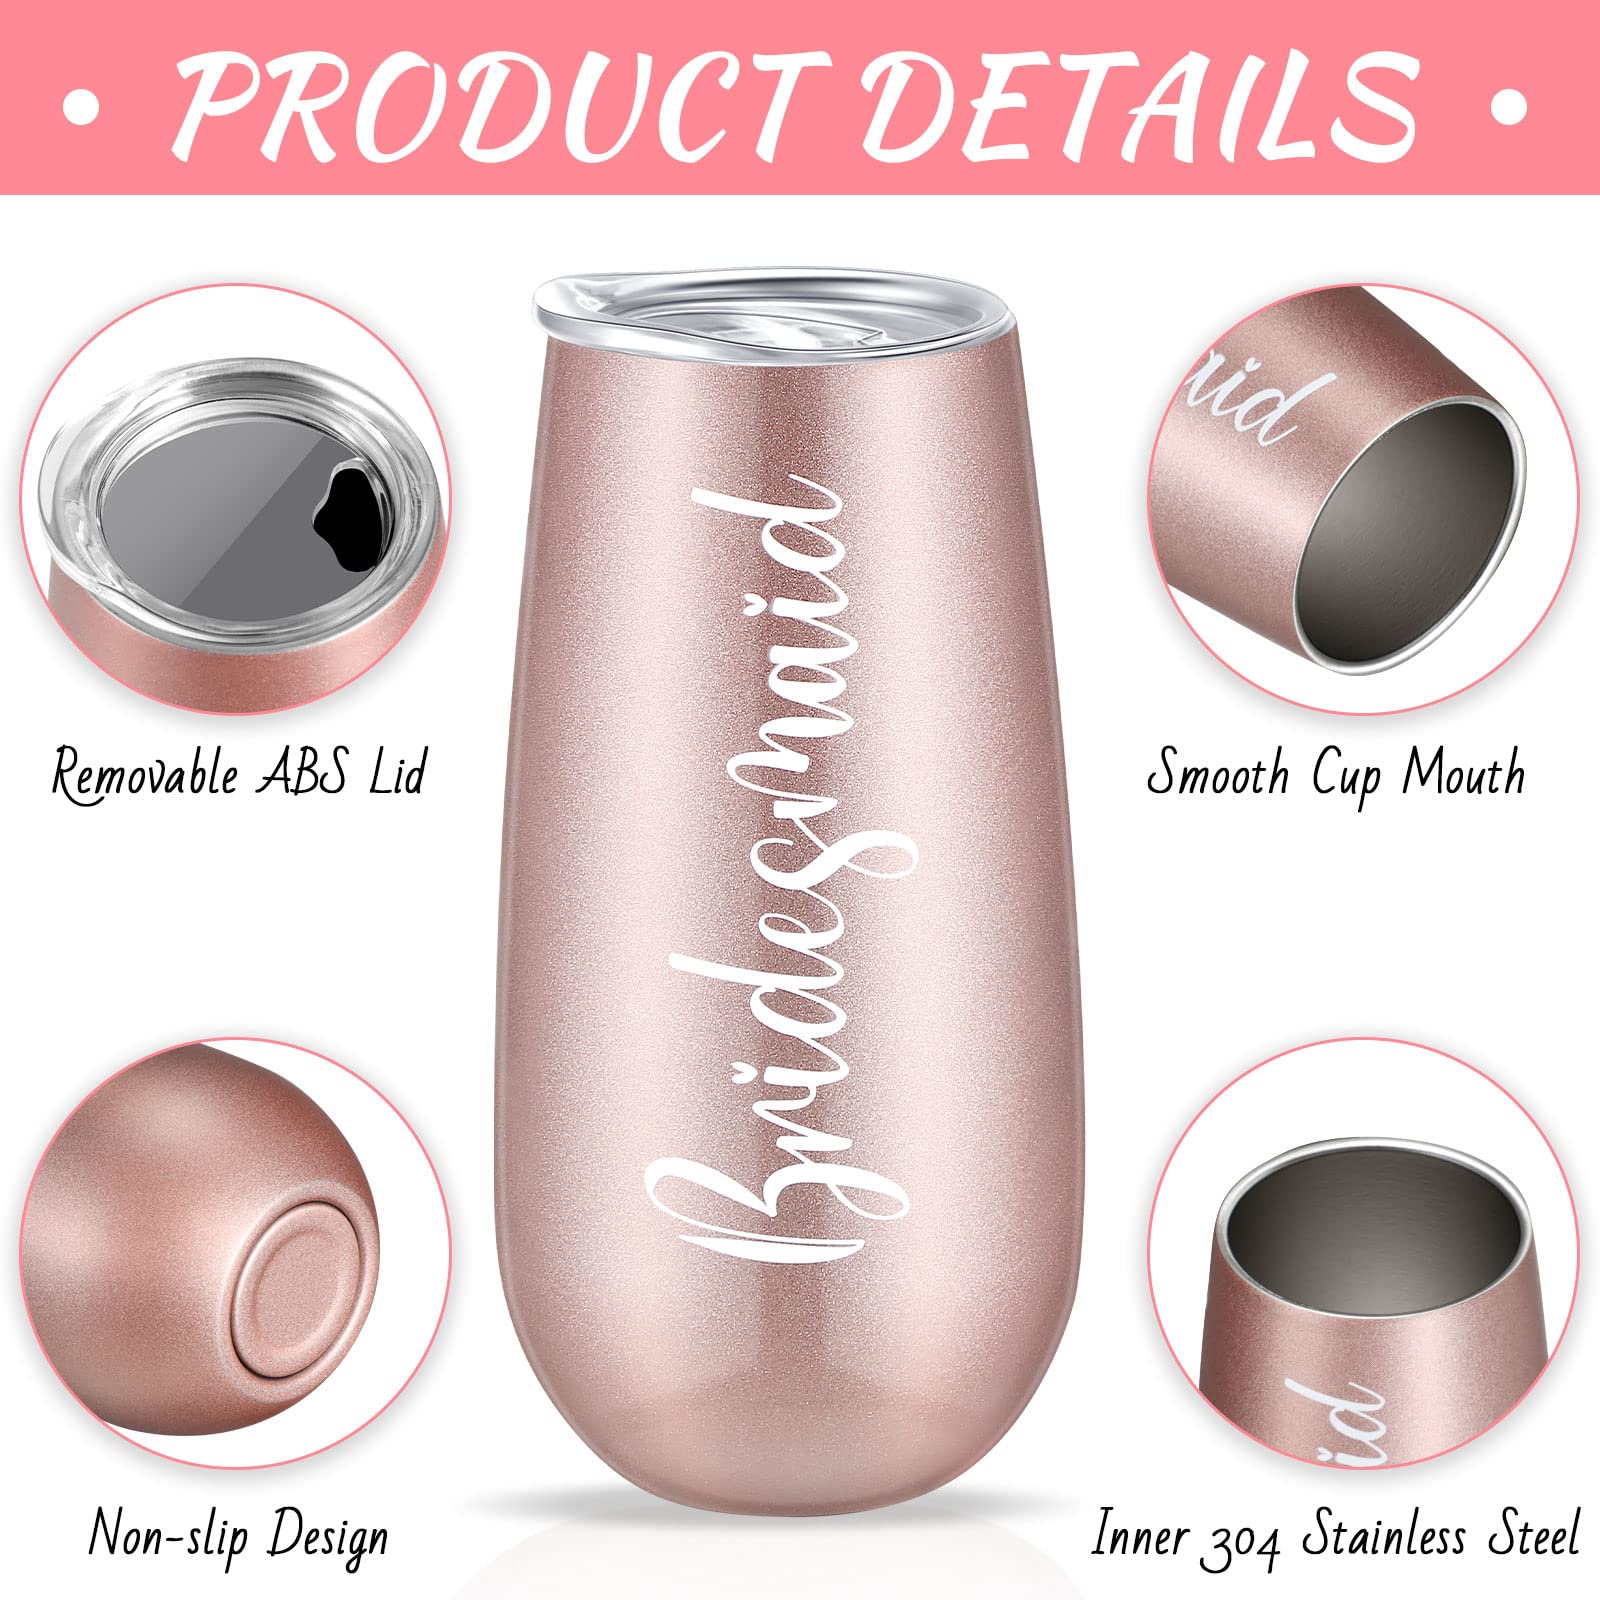 Bridesmaid Wine Tumblers Set of 8, Bride Champagne Flute Maid of Honor Bride Mugs, 6 oz Stainless Steel Bridesmaid Proposal Gifts for Engagement Wedding Bachelorette Party Supplies (Rose Gold)